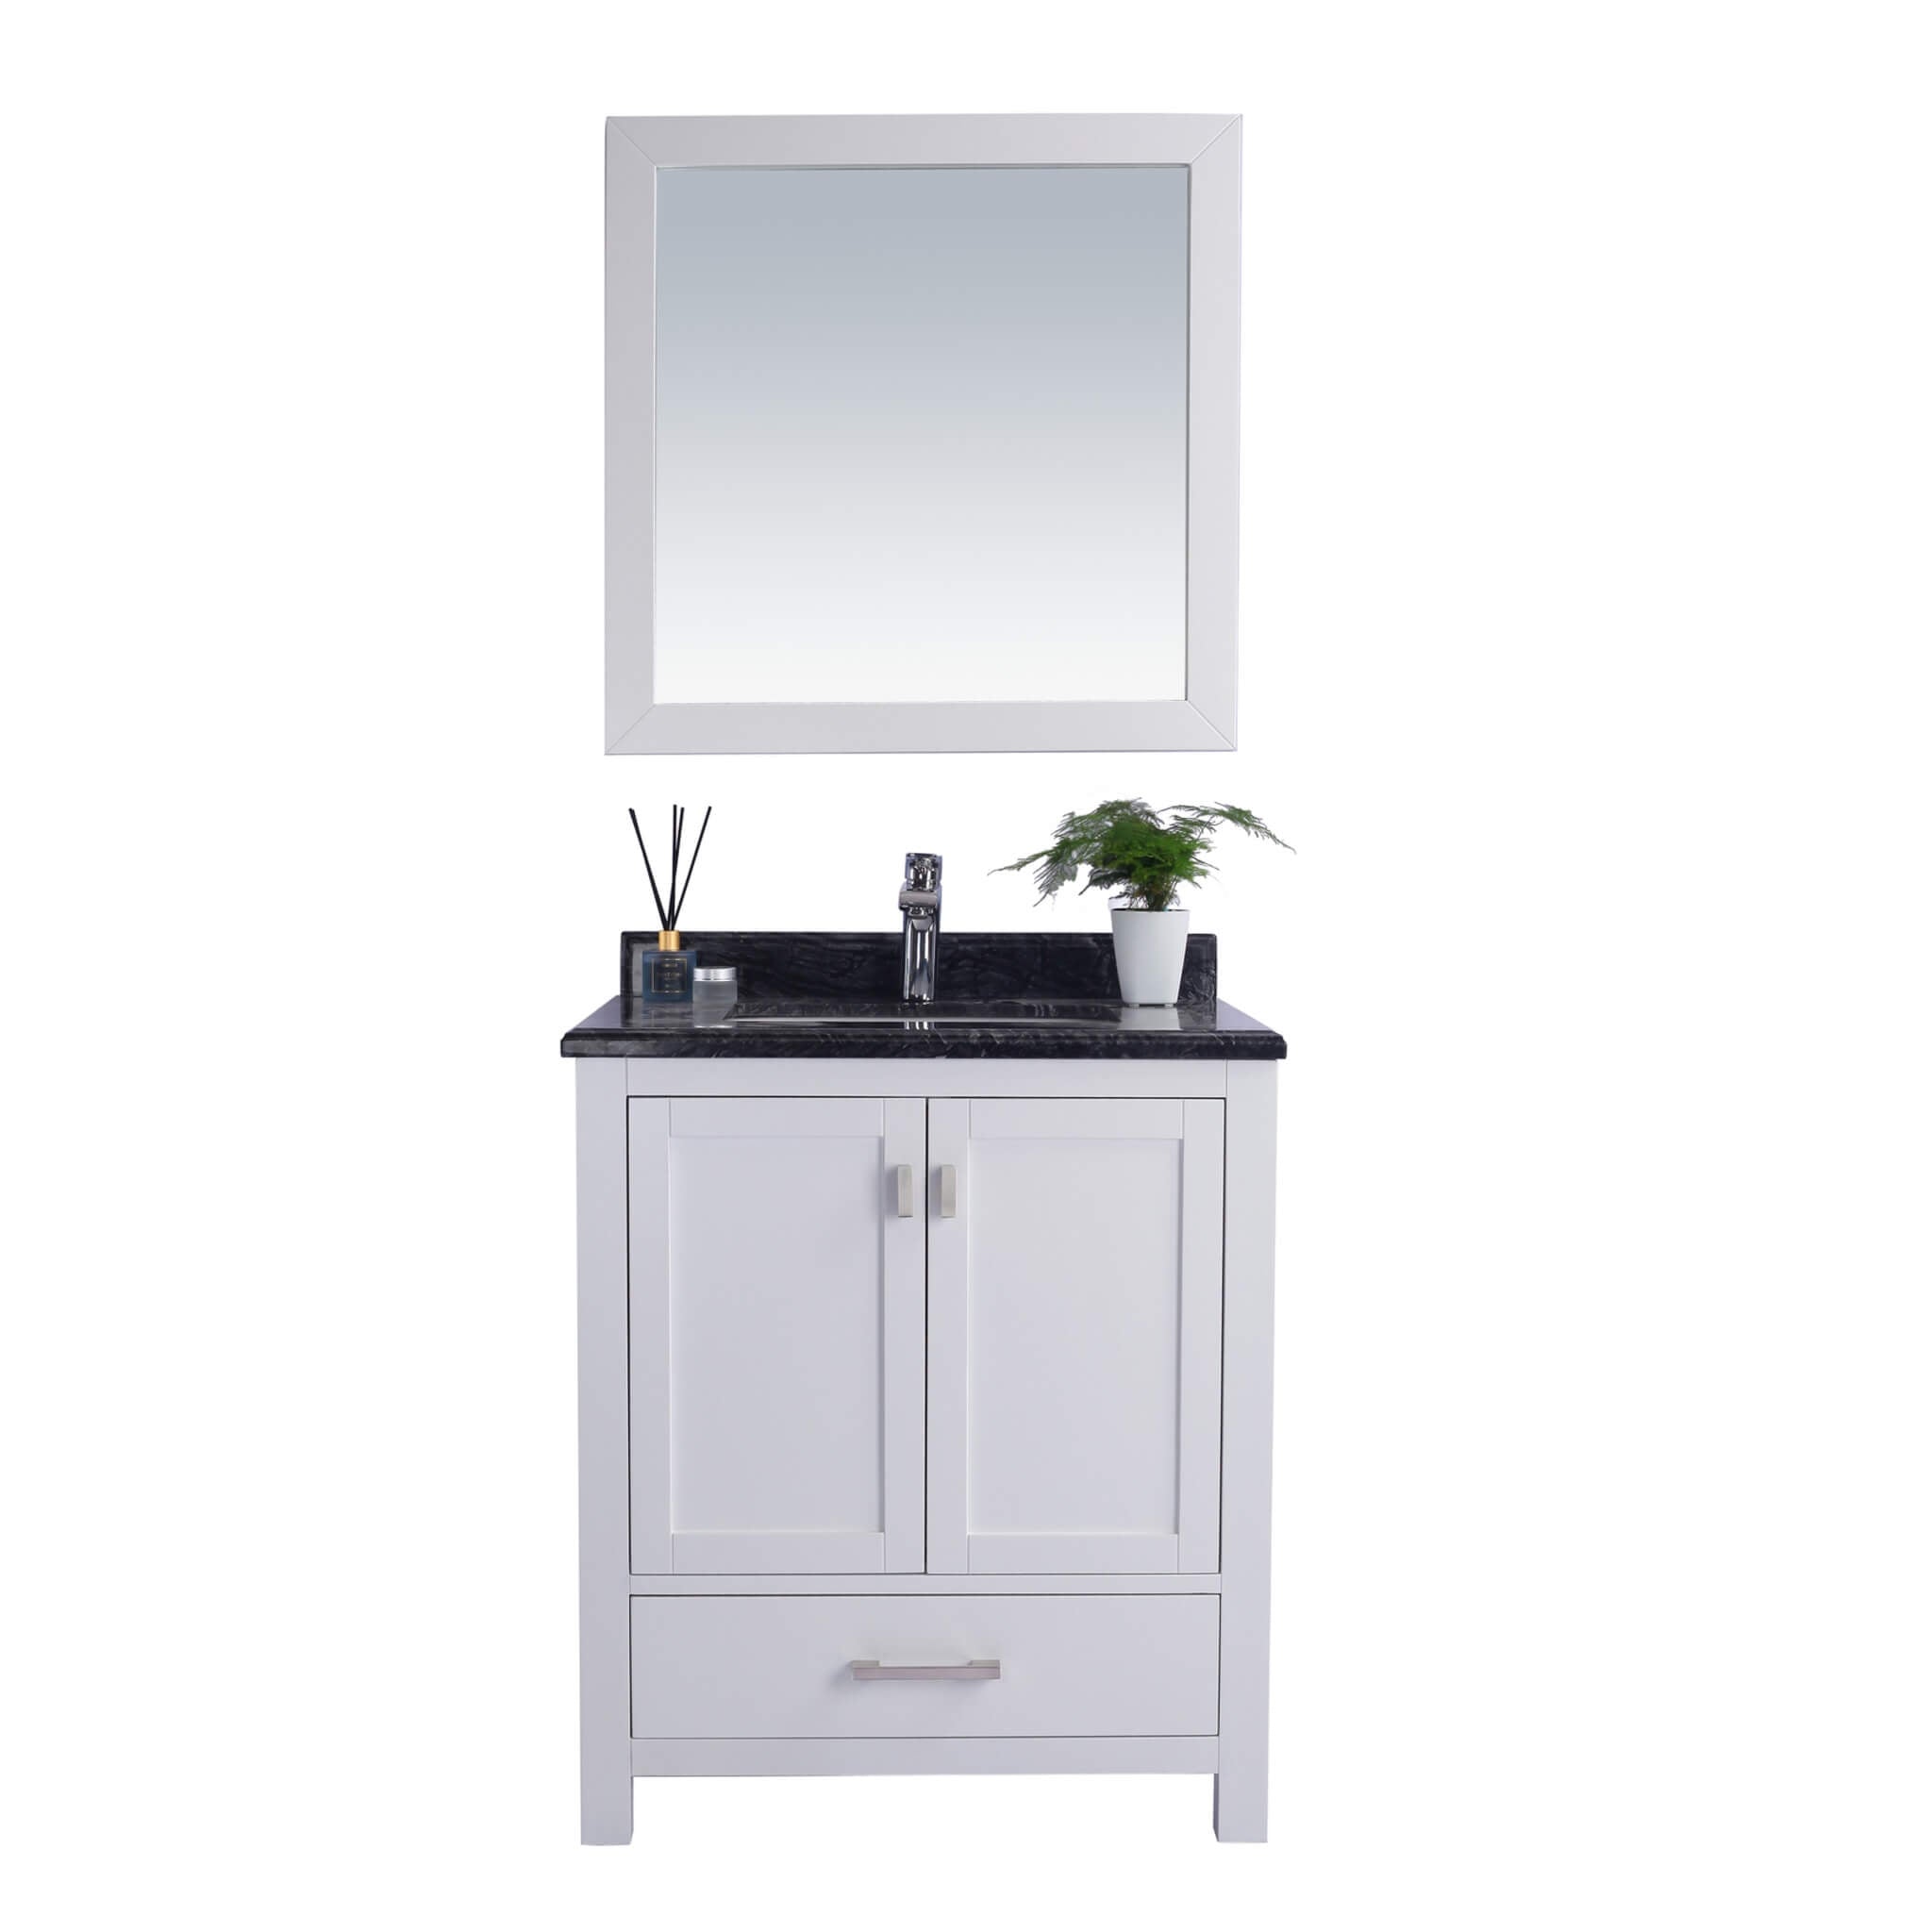 LAVIVA Wilson 313ANG-30W-BW 30" Single Bathroom Vanity in White with Black Wood Marble, White Rectangle Sink, Front View